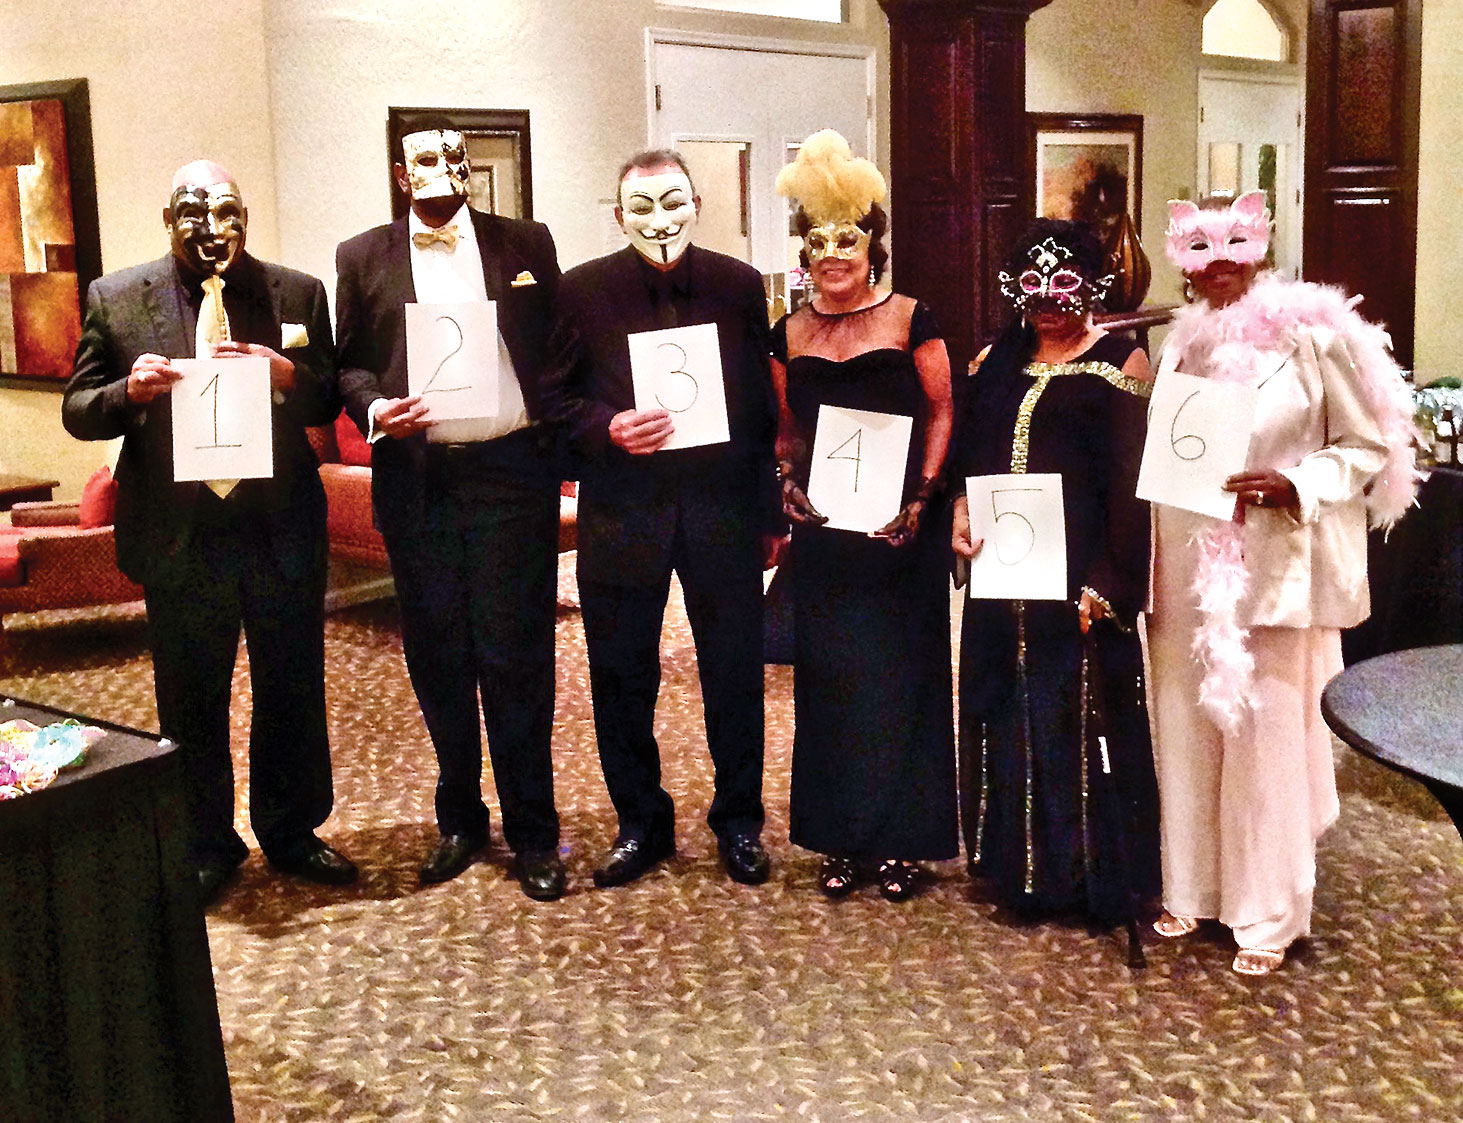 Finalists in the FFF Masquerade Mask judging contest